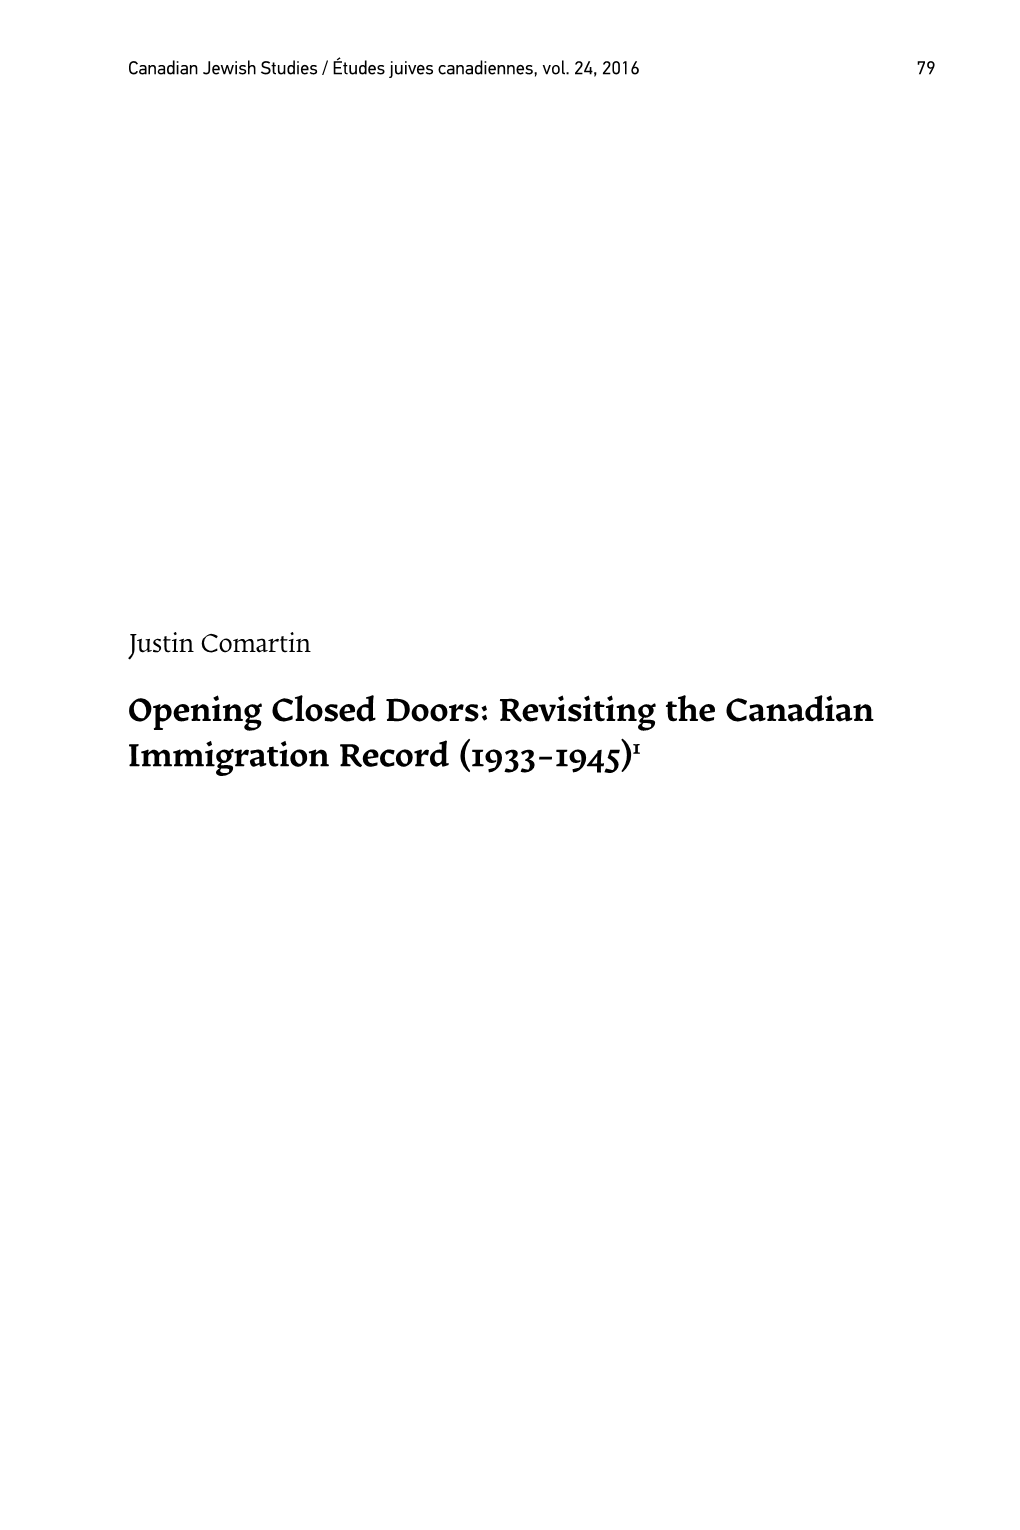 Revisiting the Canadian Immigration Record (1933-1945)1 Justin Comartin / Opening Closed Doors: Revisiting the Canadian 80 Immigration Record (1933-1945)